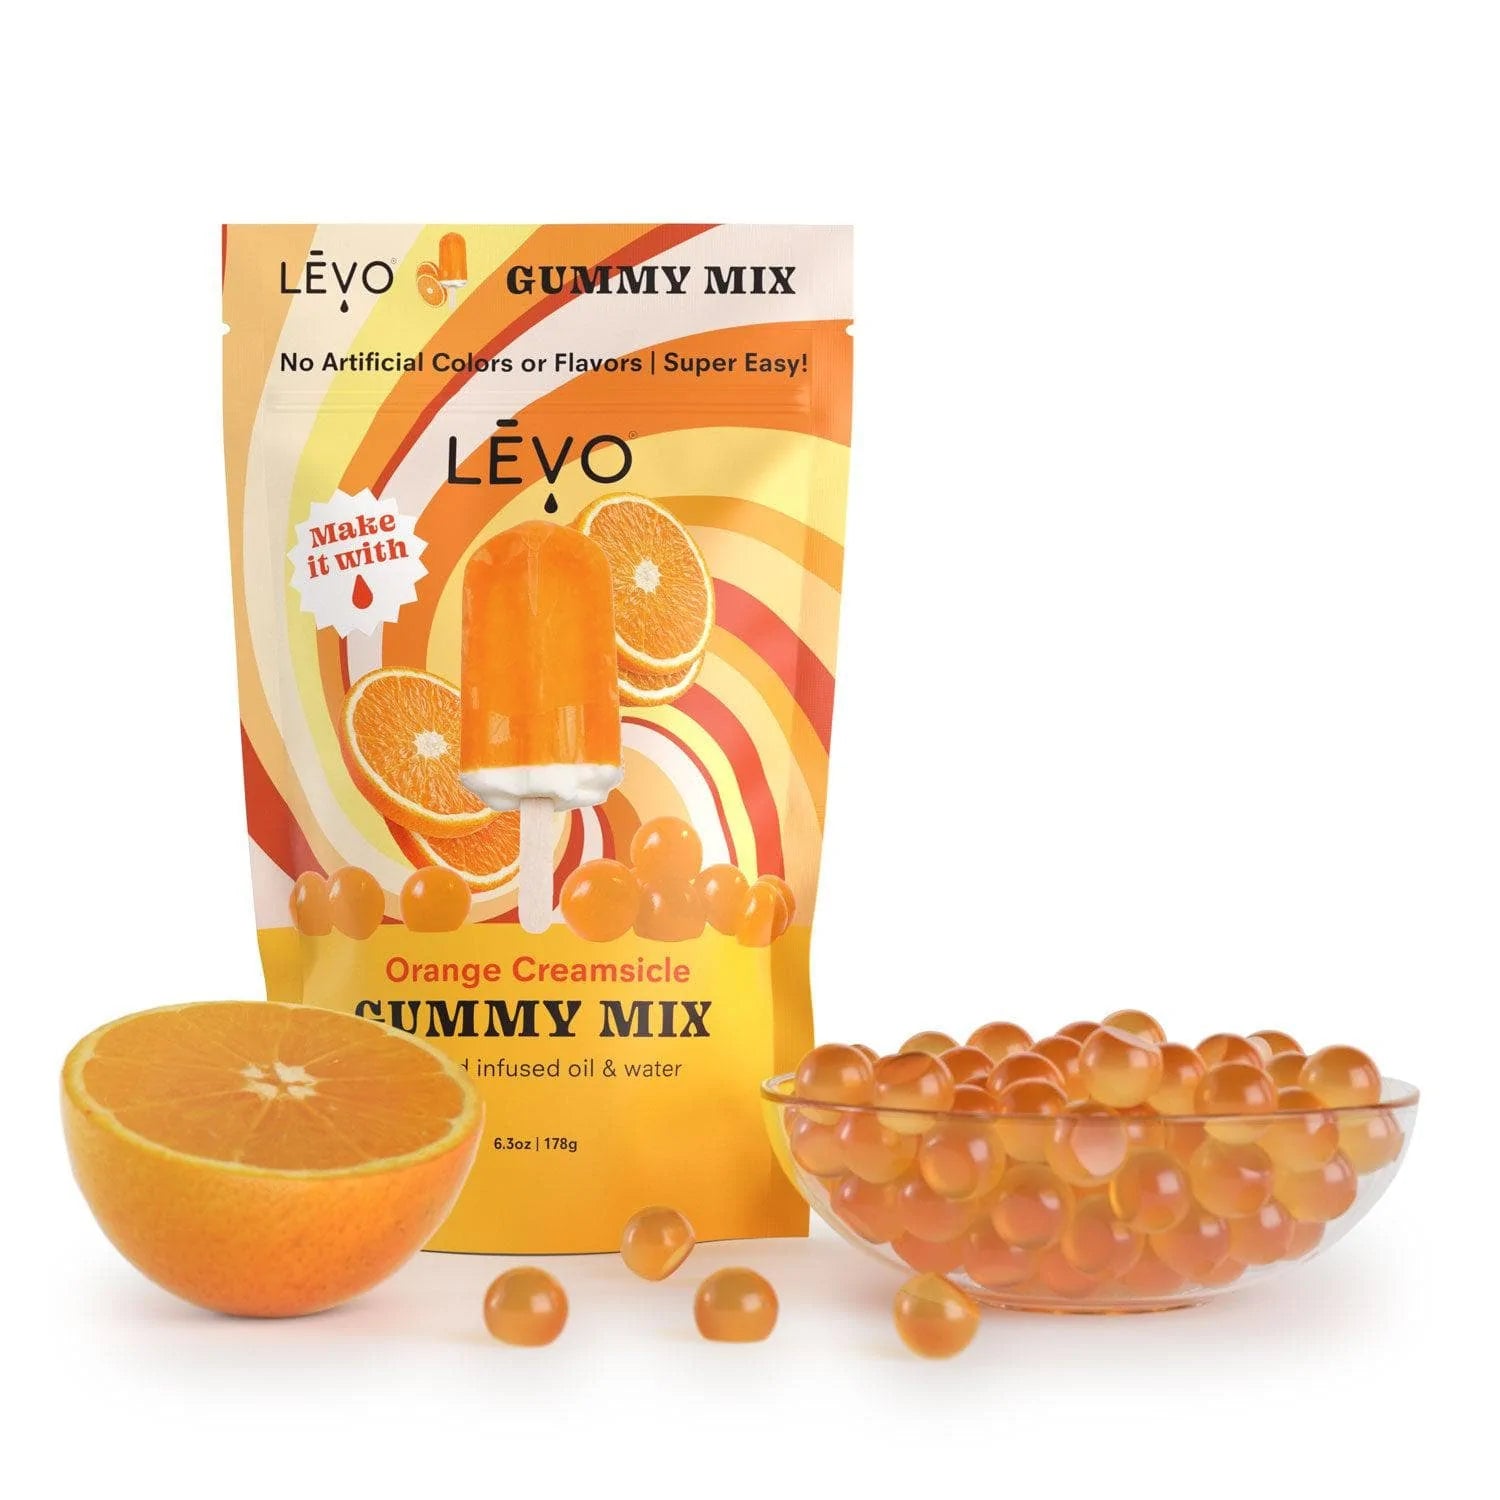 Orange Creamsicle gummy mix, made with all natural colors and flavors. Make your own dosed edible gummies at home, and save 10x the cost of buying pre-made. LEVO pays for itself compared to buying tinctures and gummies at the store.